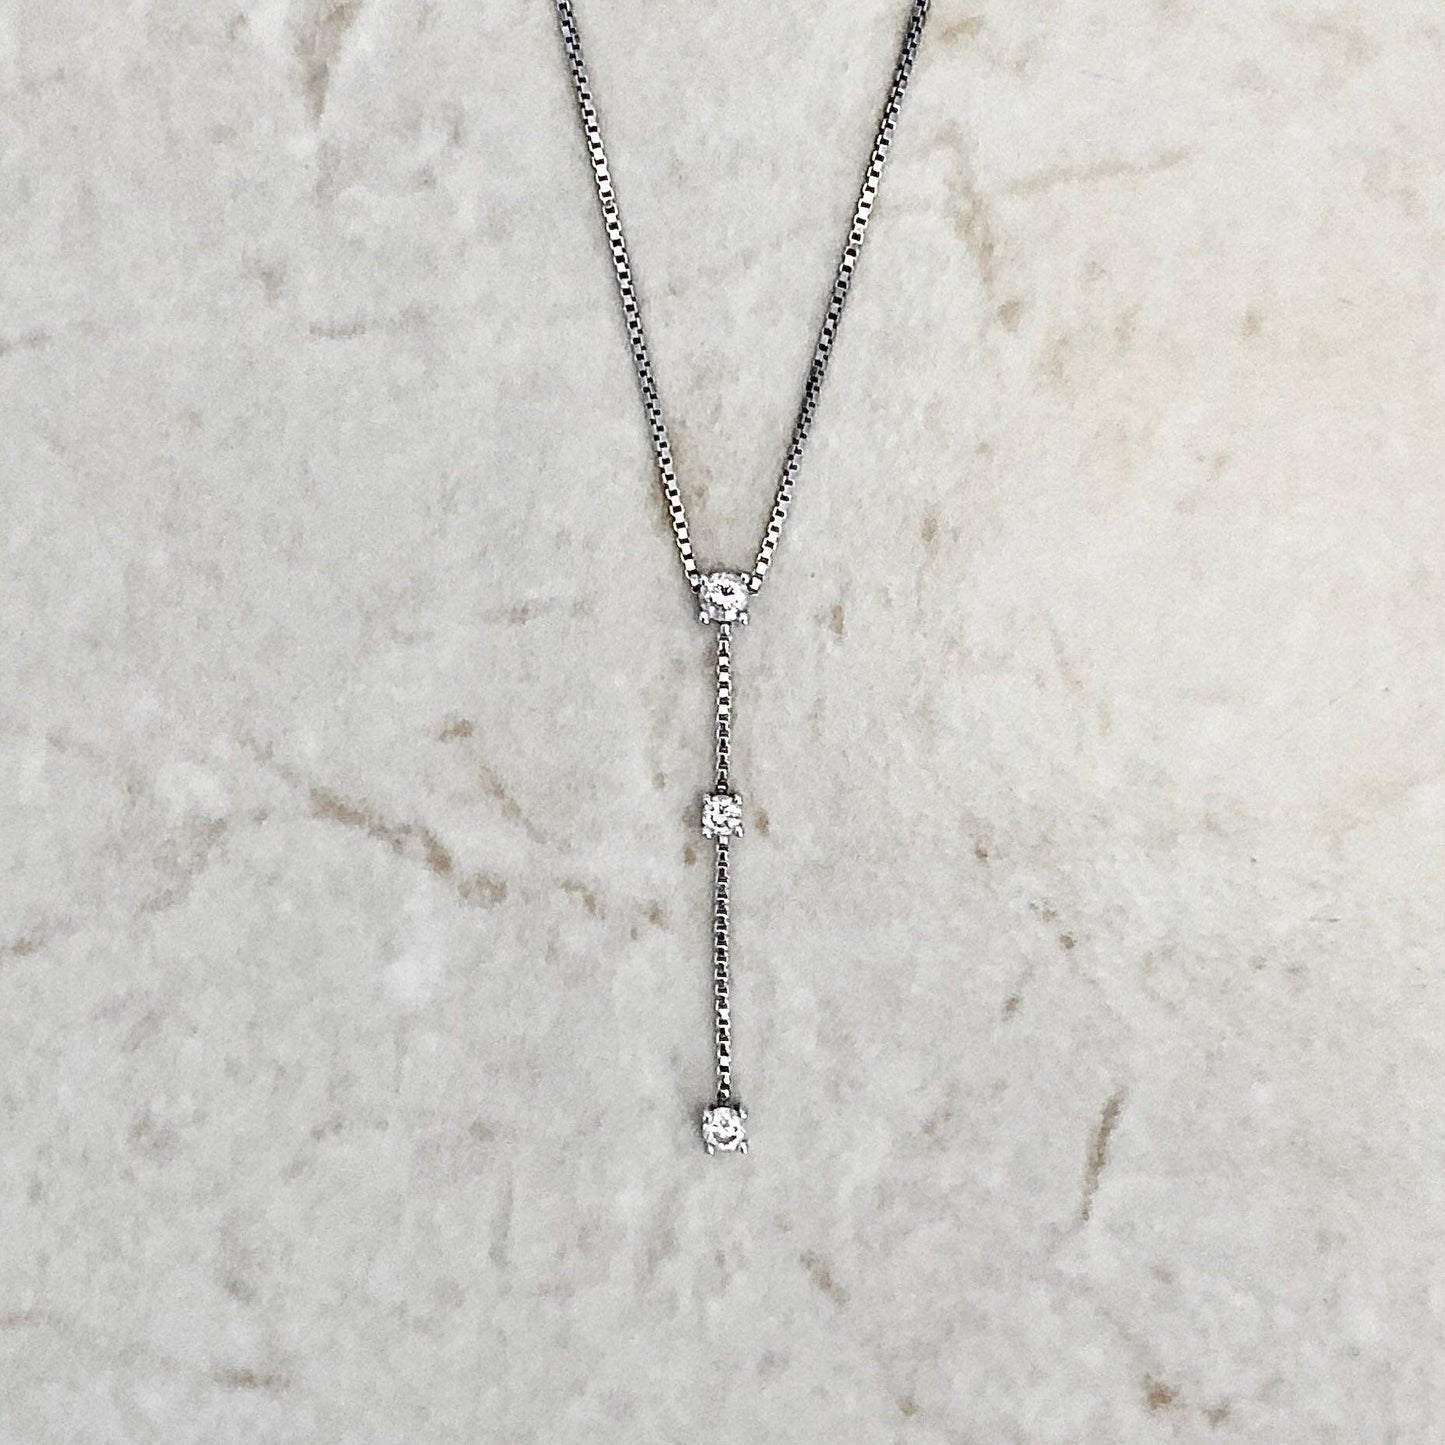 14K 3 Stone Dangling Diamond Pendant Necklace - White Gold Bridal Jewelry - Wedding Pendant - Birthday Gift For Her - Holiday Gift